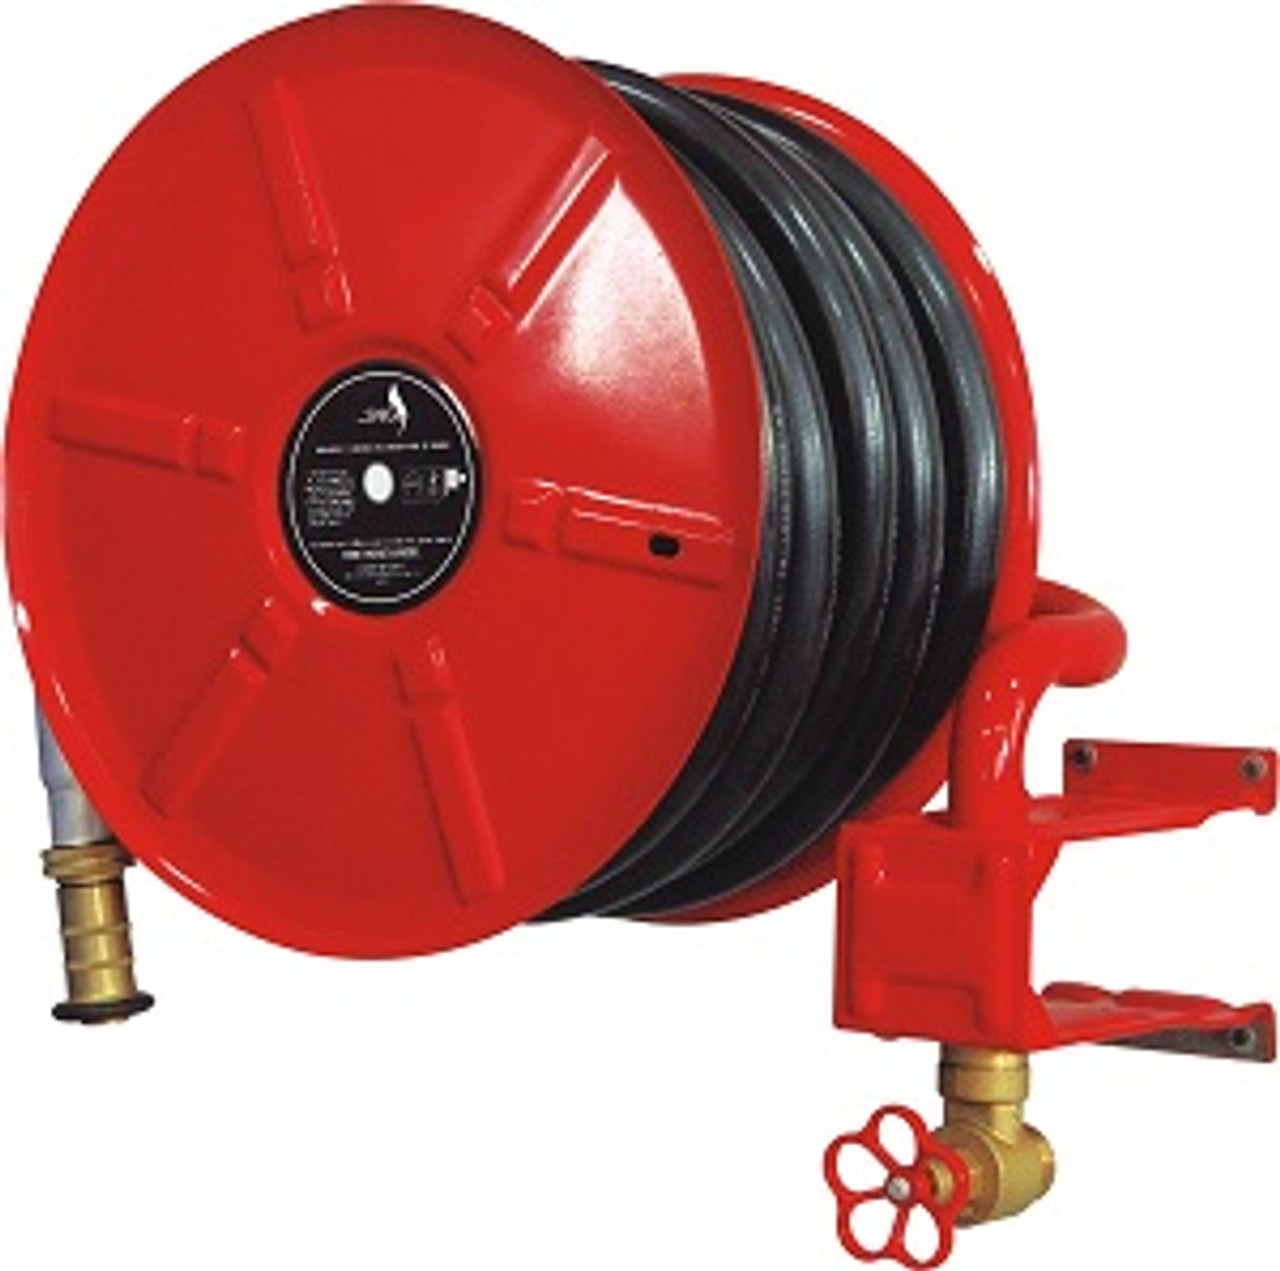 Buy Fire Hose Reel for Fire Fighting System from GZ Industrial Supplies